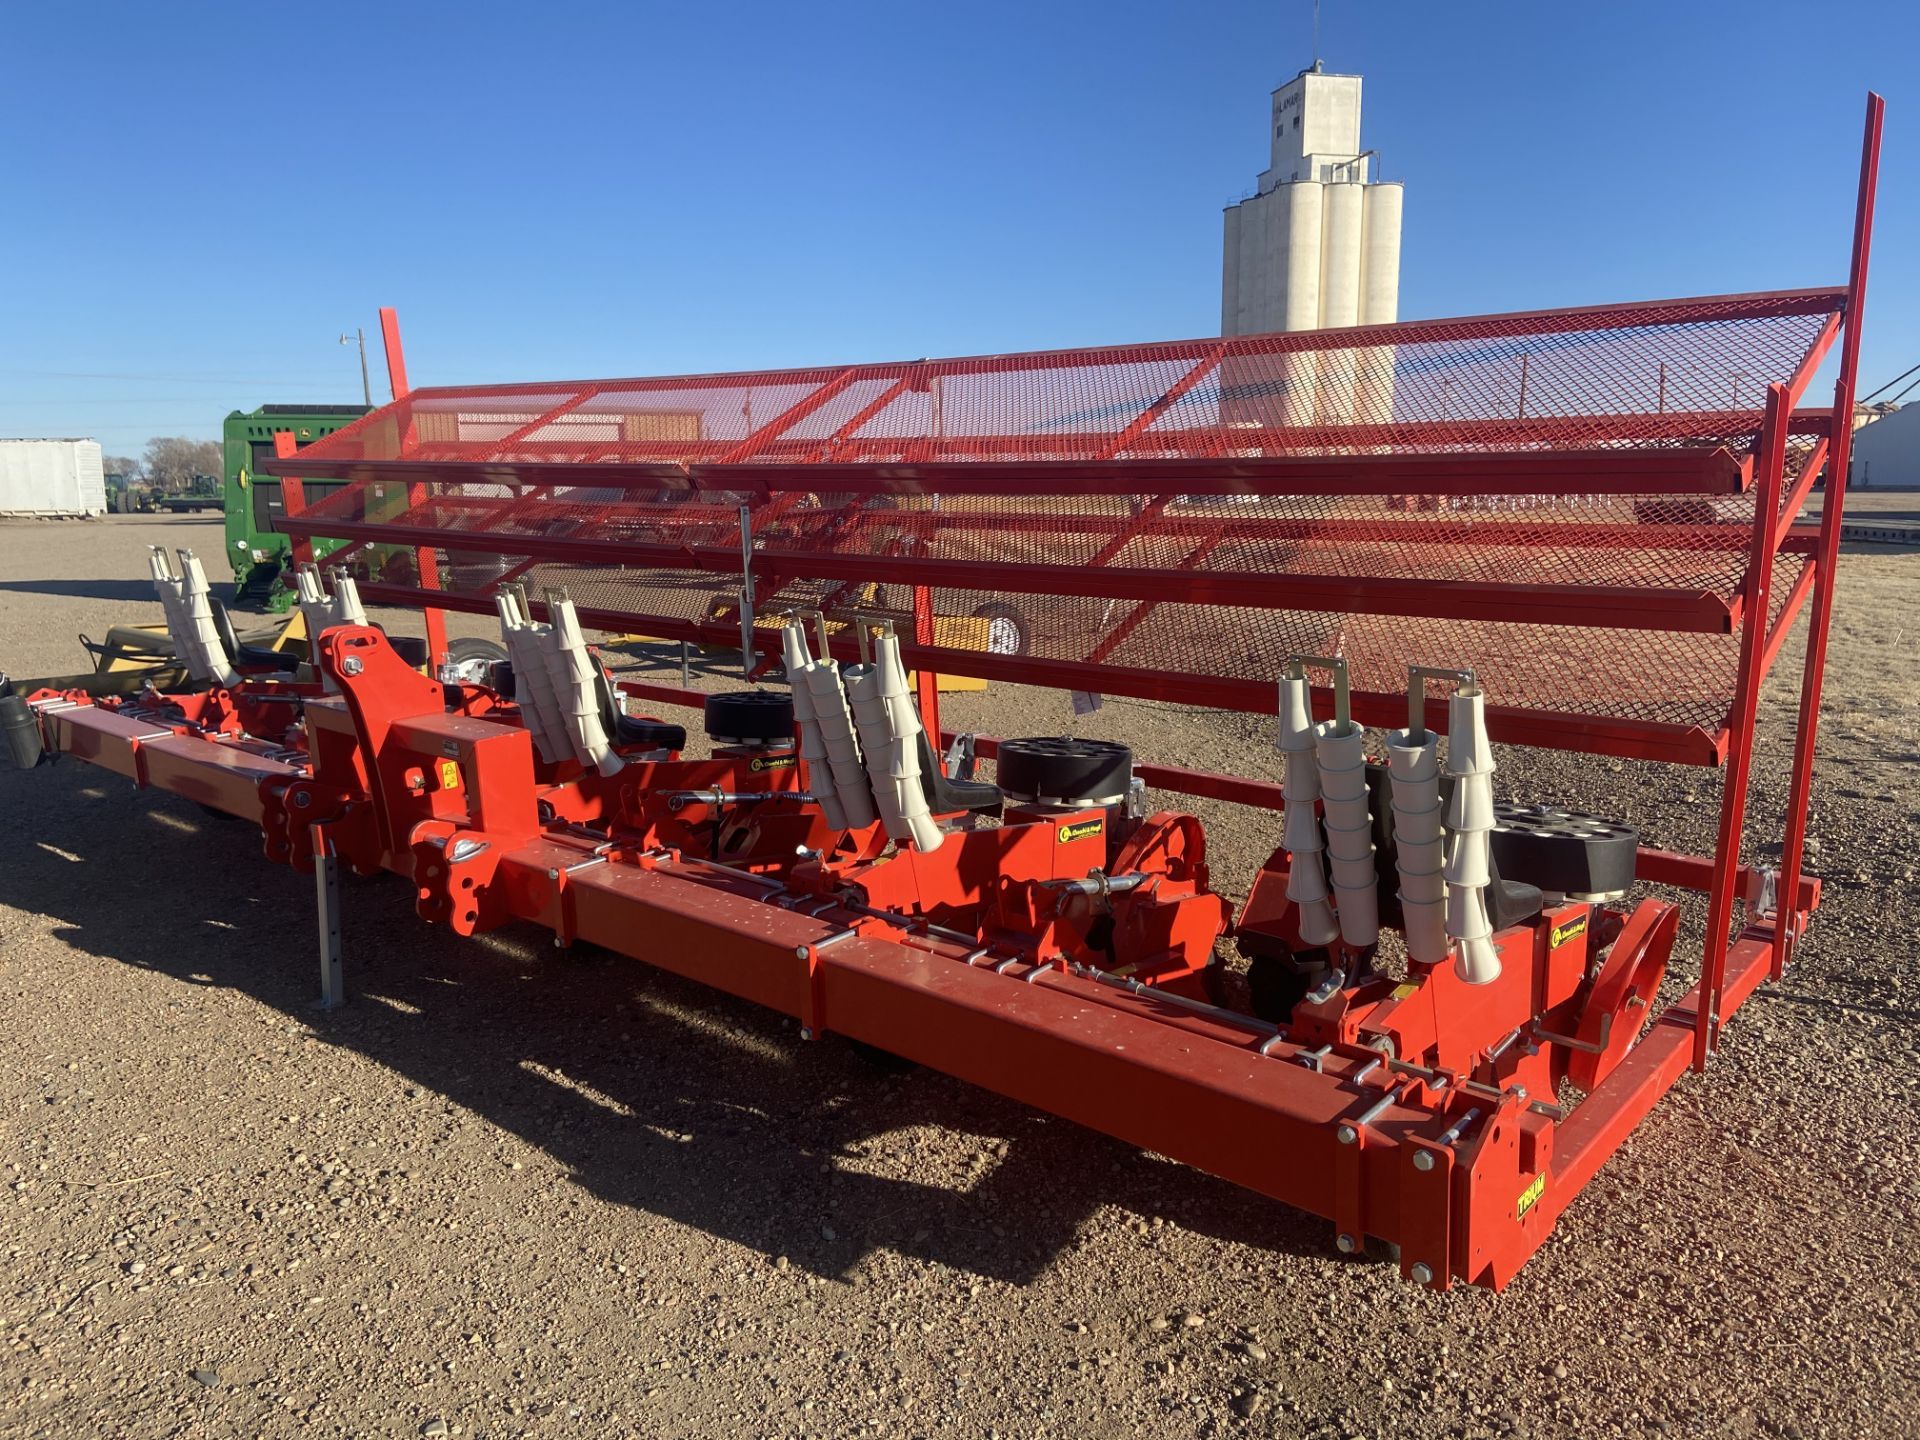 NEW Checchi and Magli 5 Seat Transplanter, Type# Trium 45, Year 2019, Rigging/ Loading Fee: TBD, - Image 3 of 5